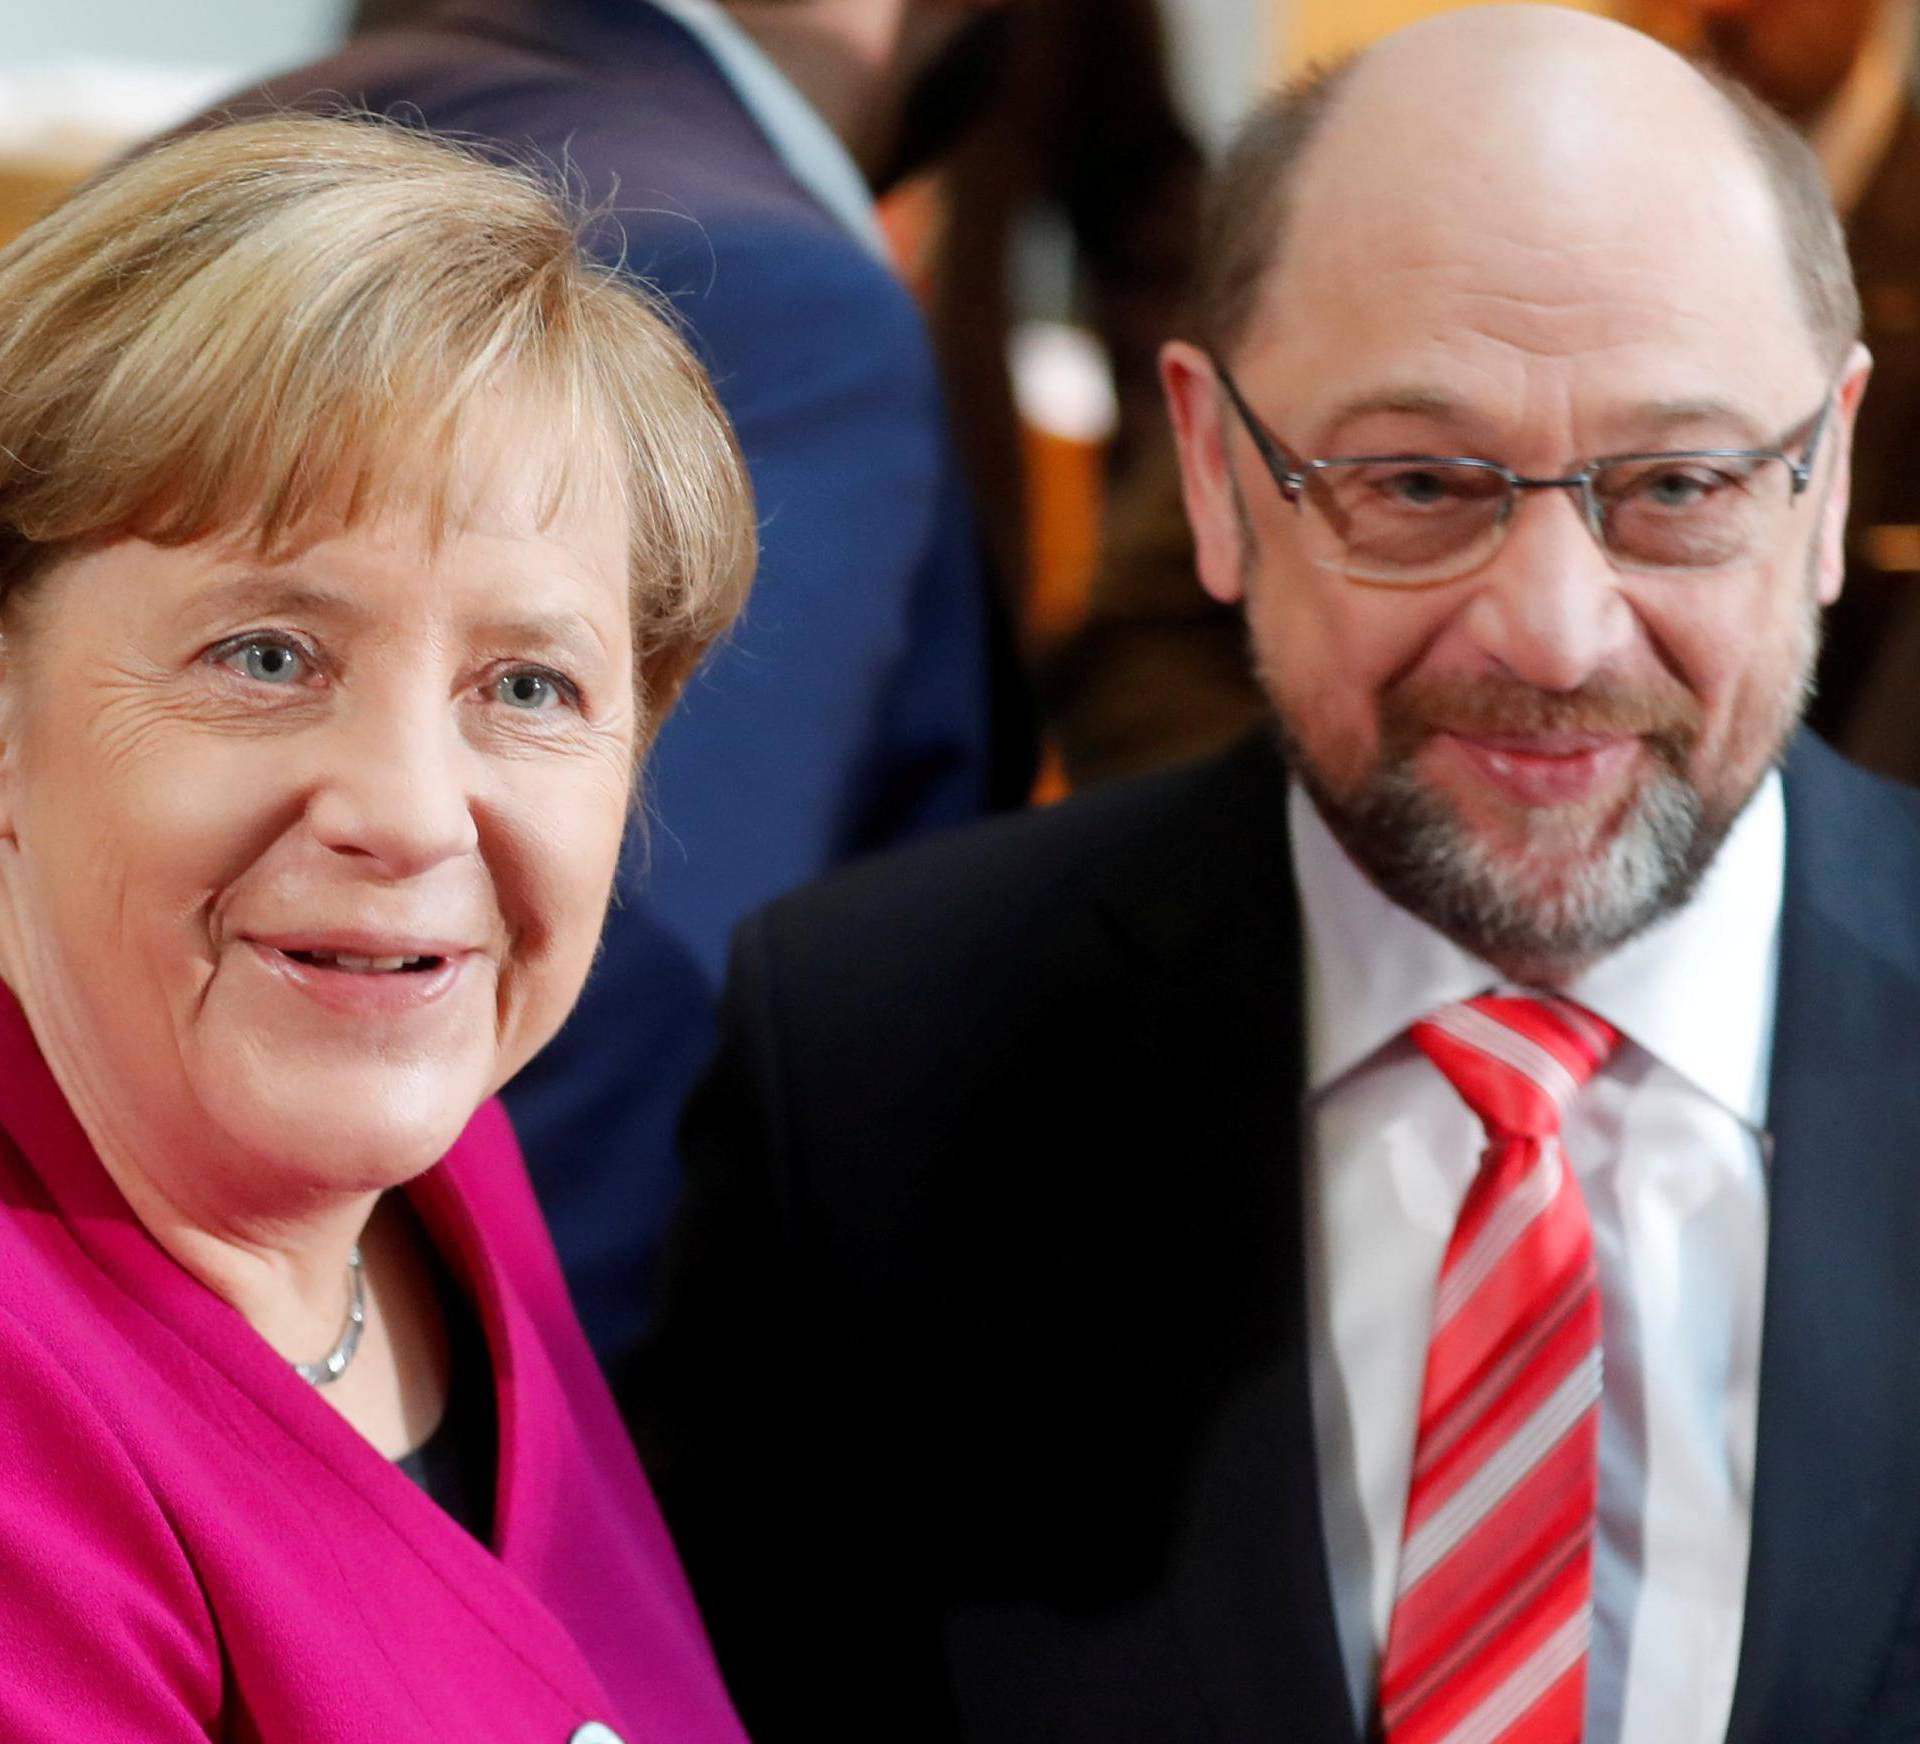 CDU leader and acting German Chancellor Merkel and SPD leader Schulz shake hands a speech before exploratory talks about forming a new coalition government at the SPD headquarters in Berlin